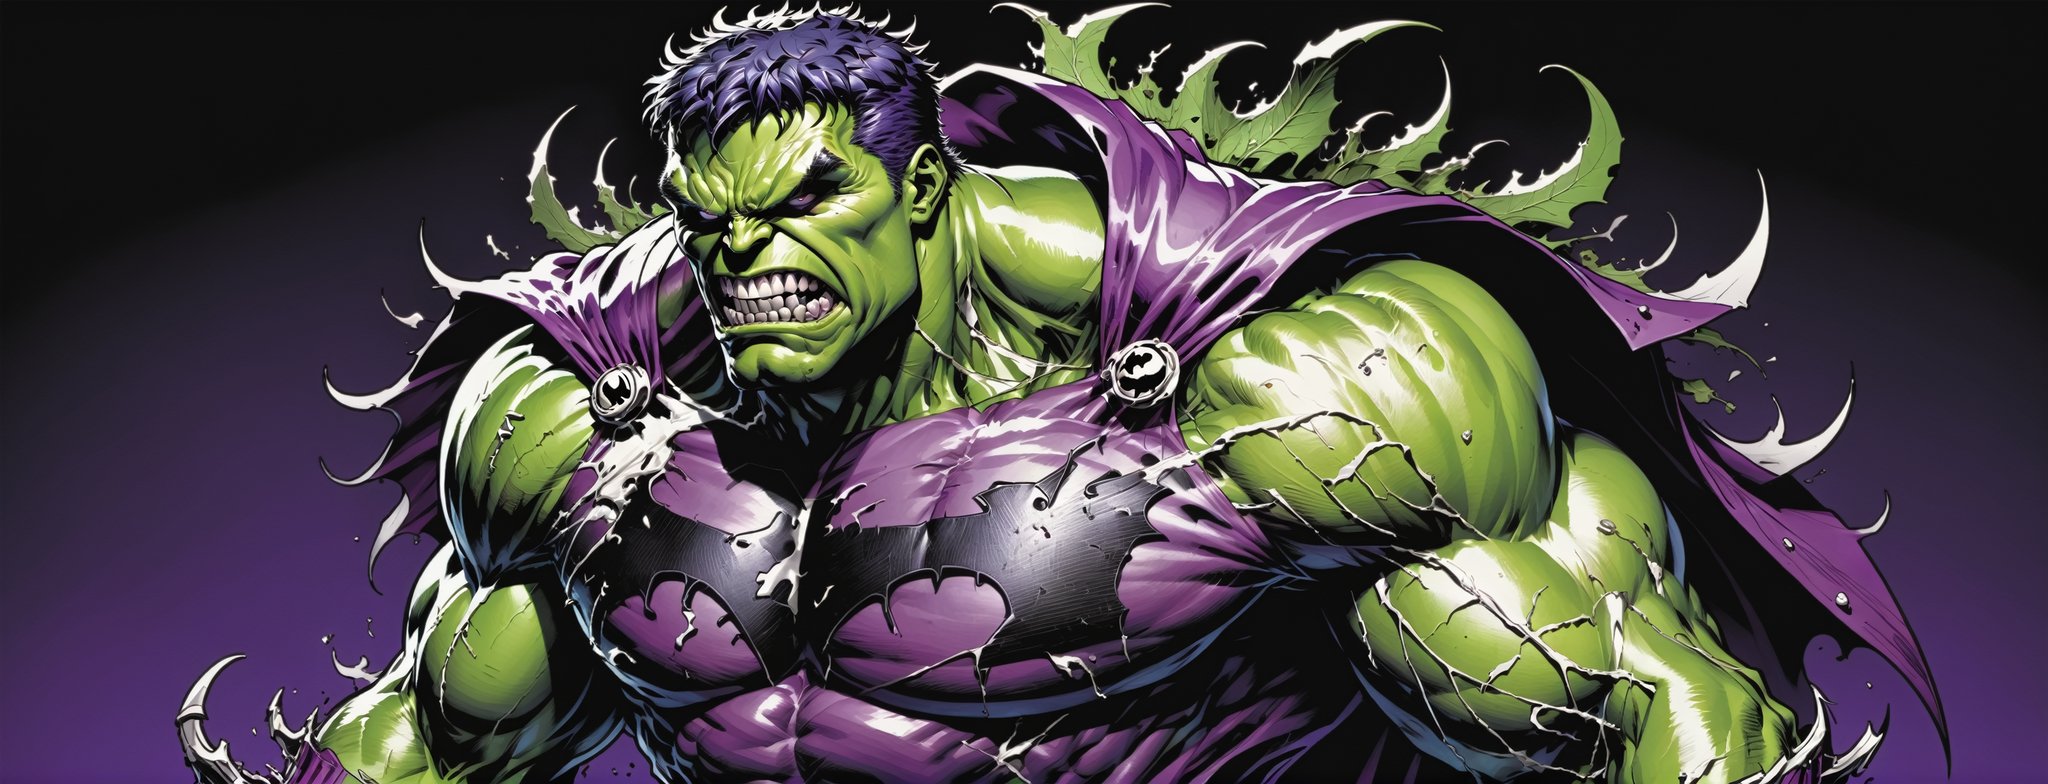 midshot, cel-shading style, centered image, ultra detailed illustration of the comic character ((Spawn Hulk, by Todd McFarlane)),posing, suit with a skull emblem, wearing a purple Cape,  ((Full Body)), (tetradic colors), inkpunk, ink lines, strong outlines, art by MSchiffer, bold traces, unframed, high contrast, cel-shaded, vector, 4k resolution, best quality, (chromatic aberration:1.8)